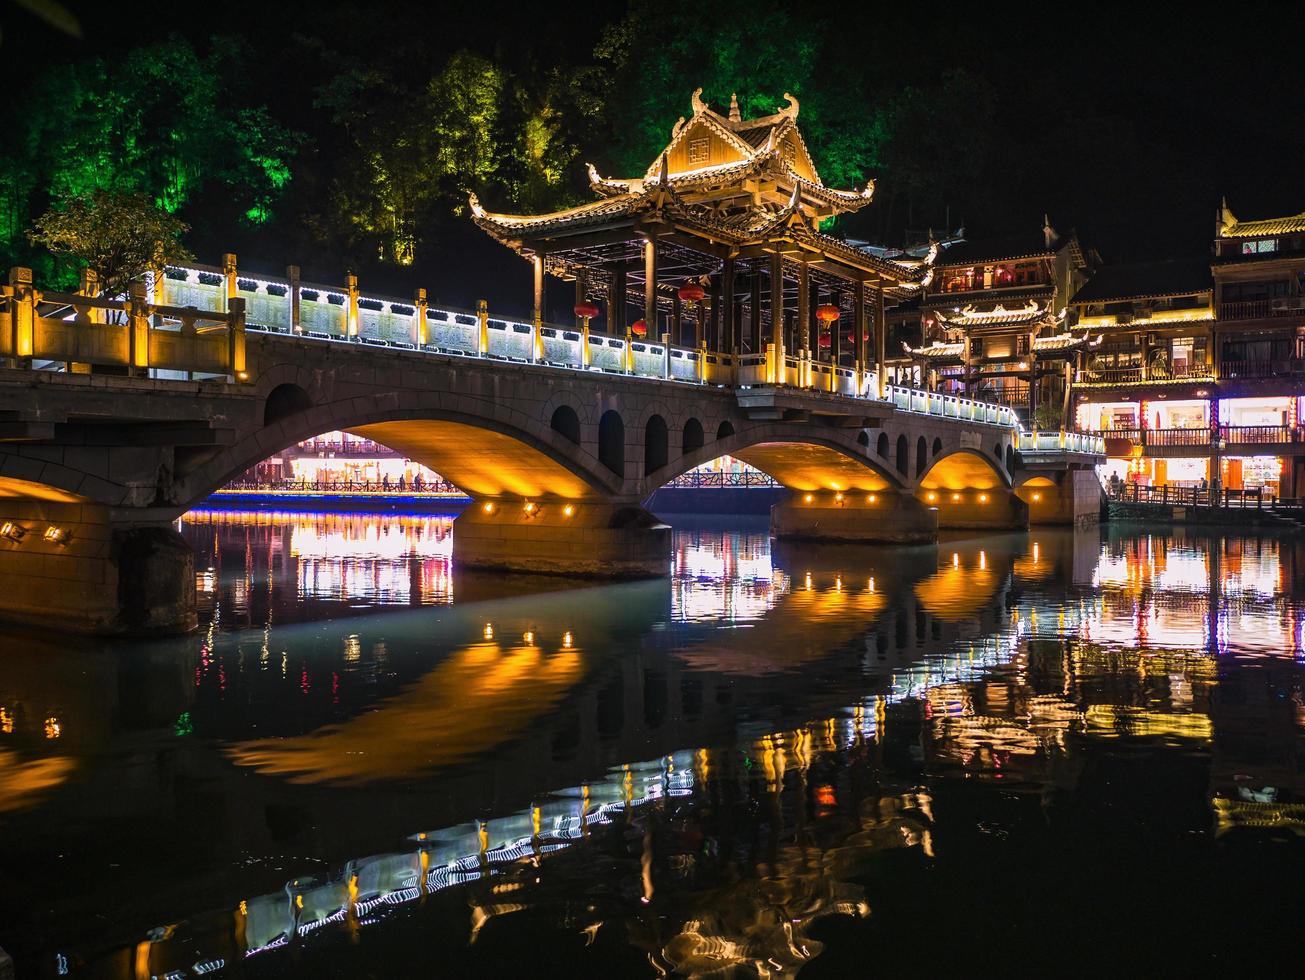 Scenery view of the bridge in the night of fenghuang old town .phoenix ancient town or Fenghuang County is a county of Hunan Province, China photo